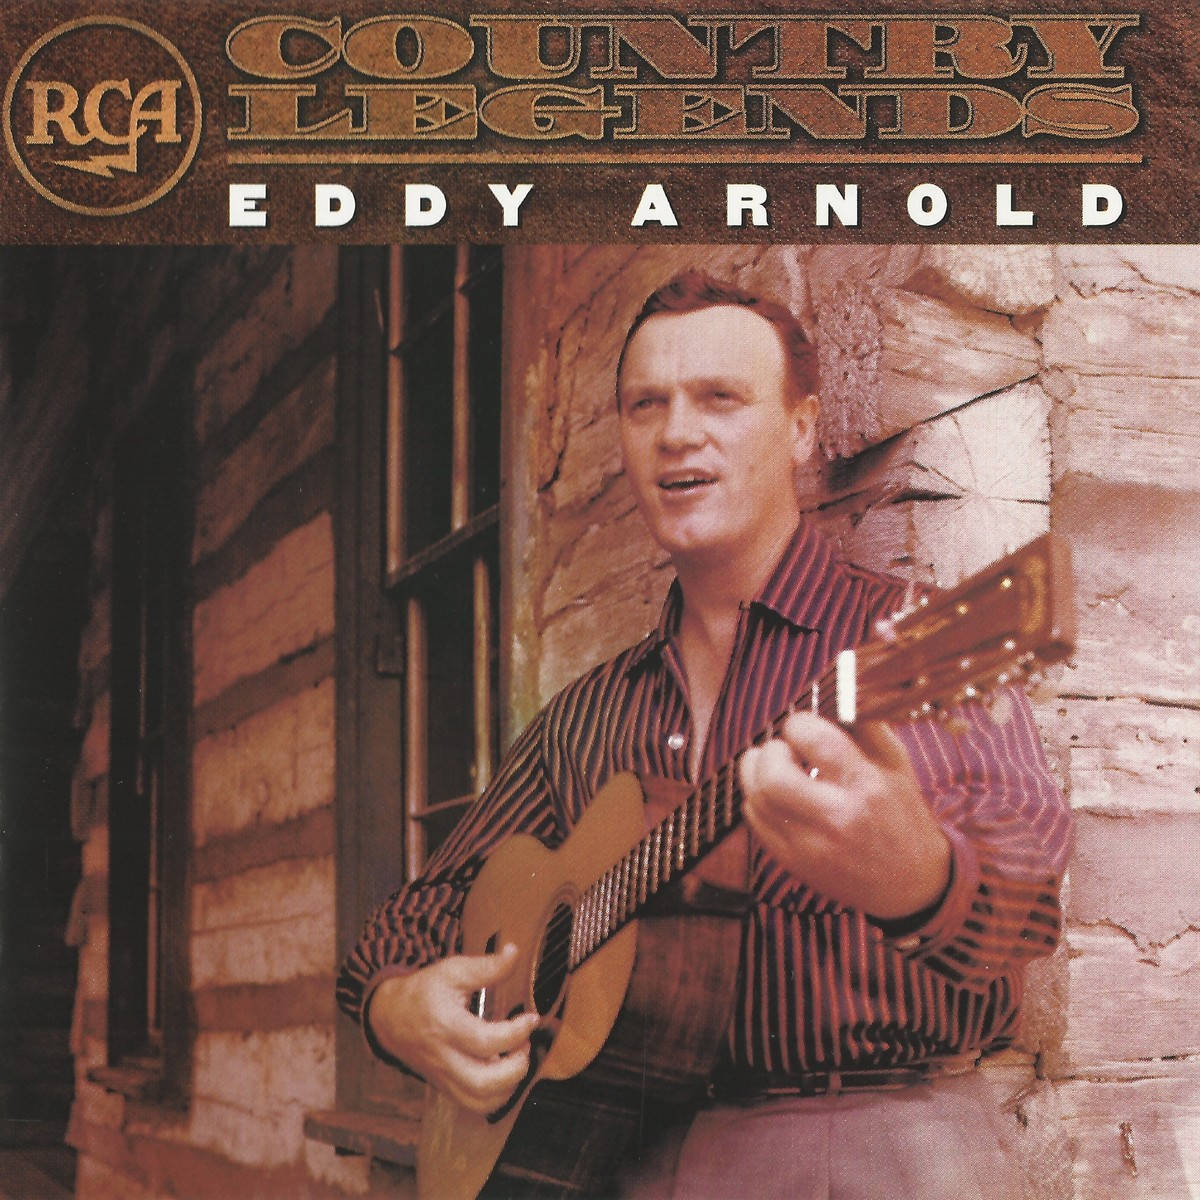 Rca Country Legends Eddy Arnold Cd Cover Wallpaper